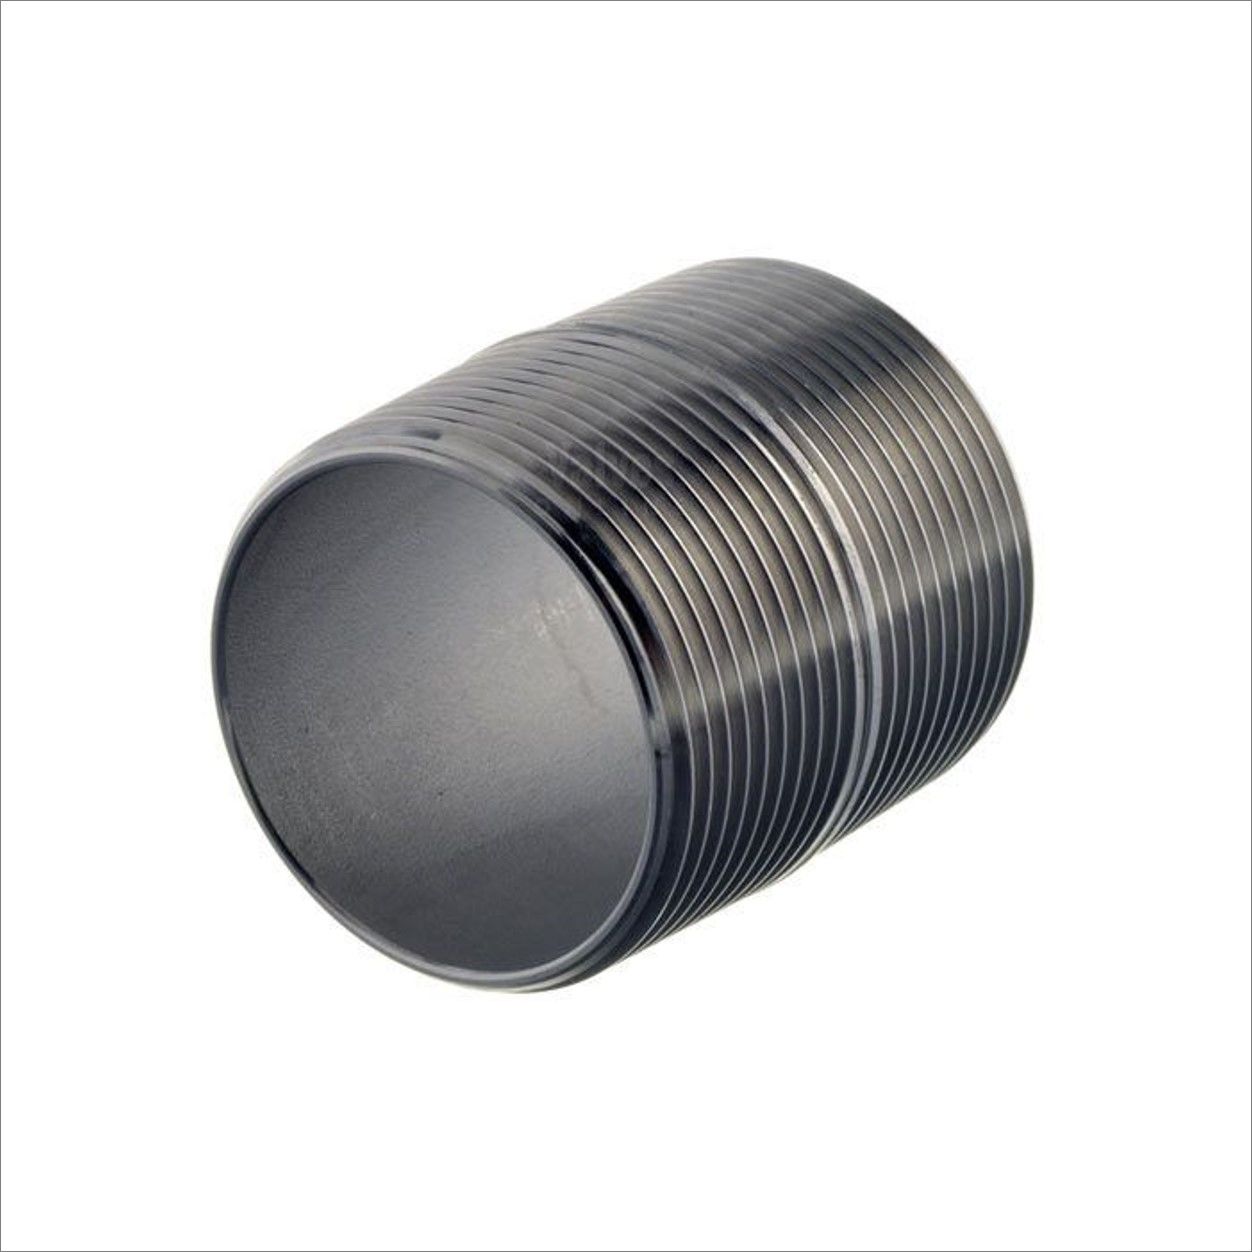 1/4" BSPT Close Taper Nipple X 25MM 316 Stainless Steel 150LB Pipe Fitting 